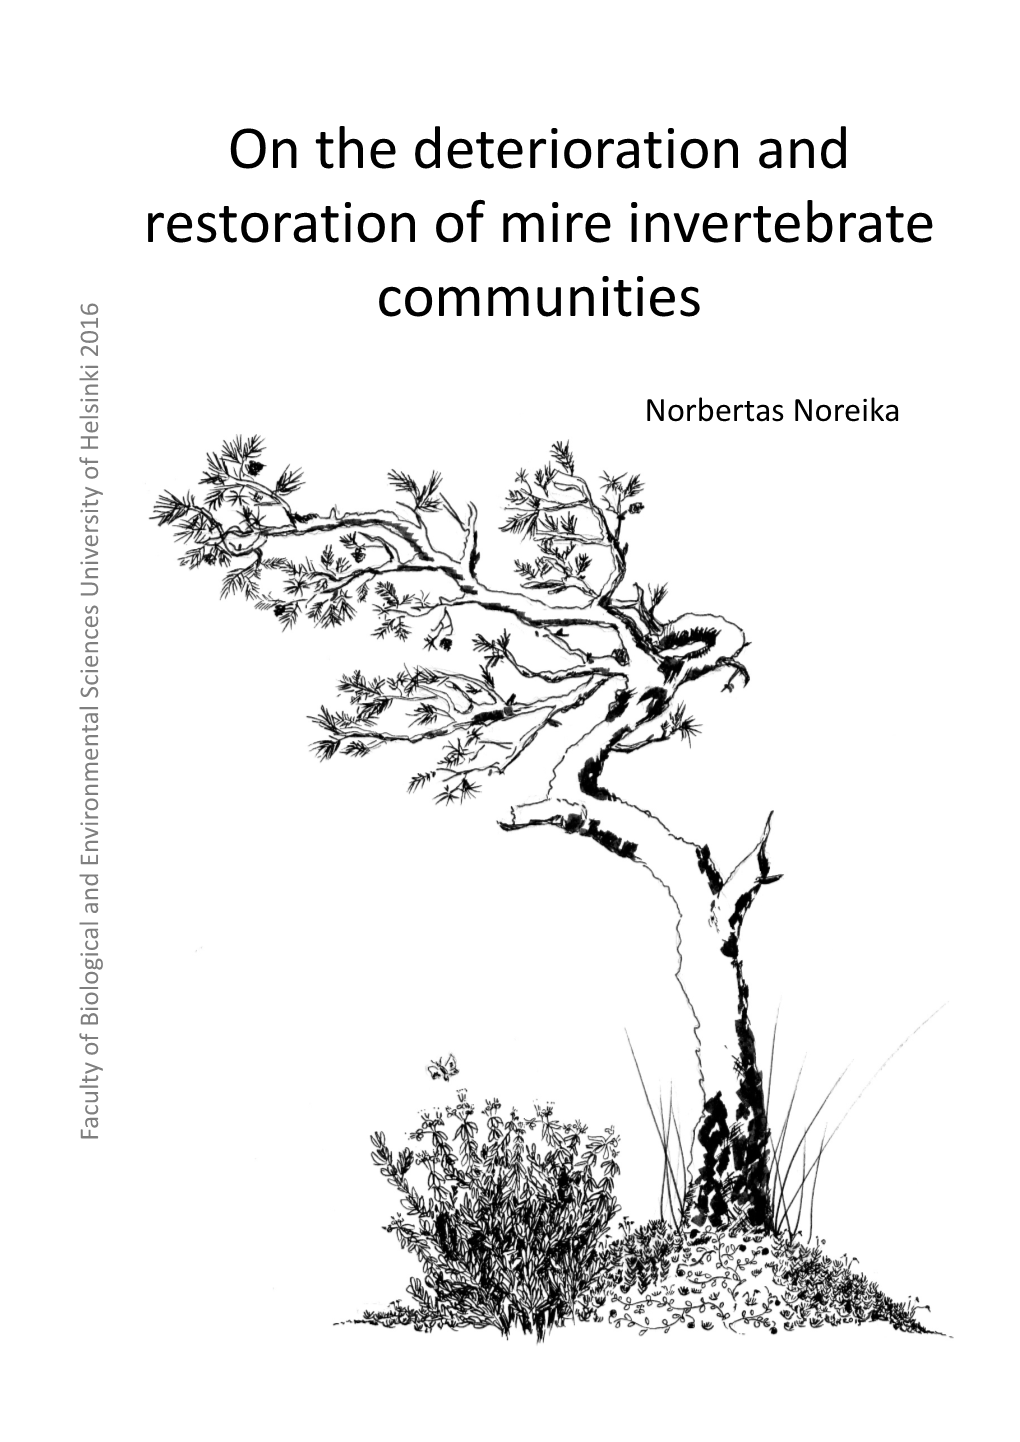 On the Deterioration and Restoration of Mire Invertebrate Communities